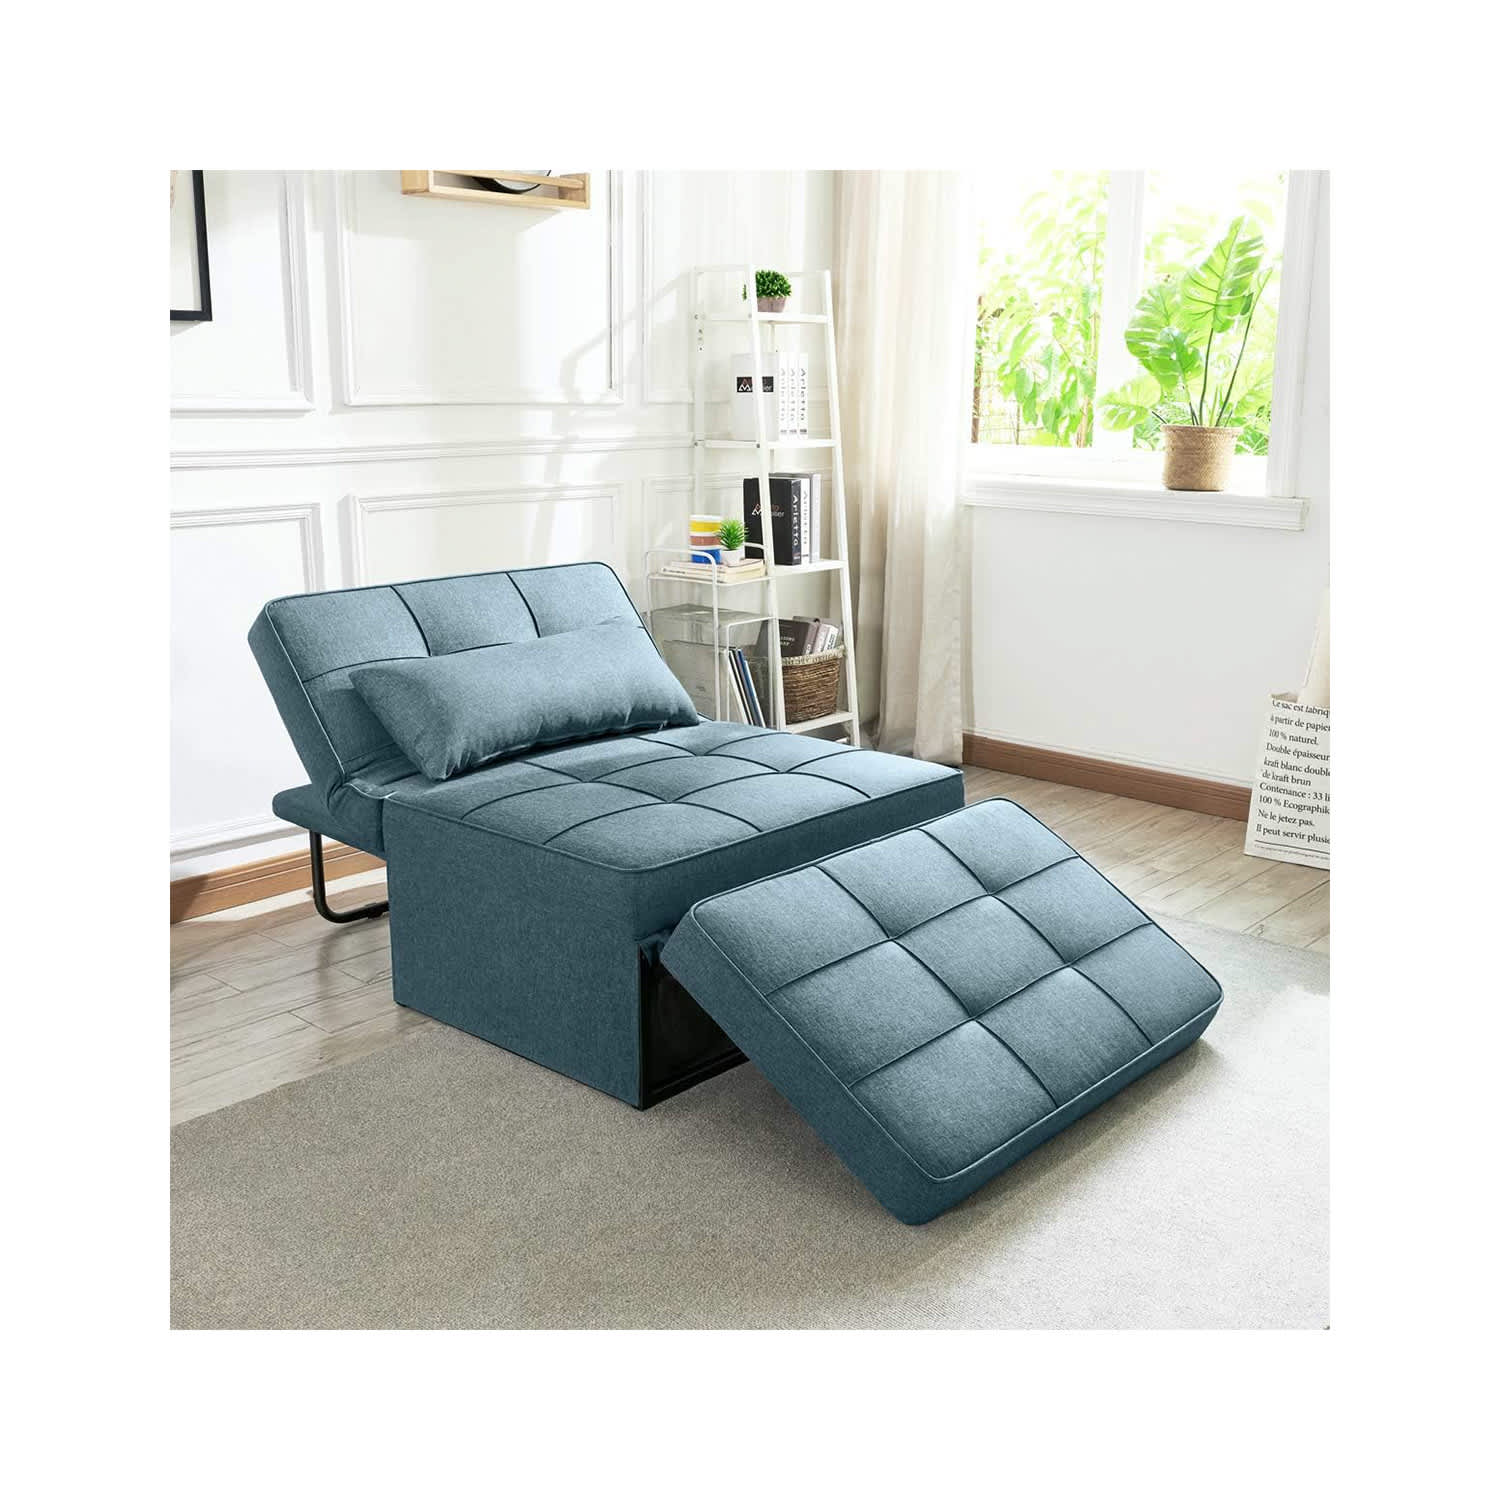 Twin Bed Chair Sleeper Design  Sofa bed mattress, Small chair for